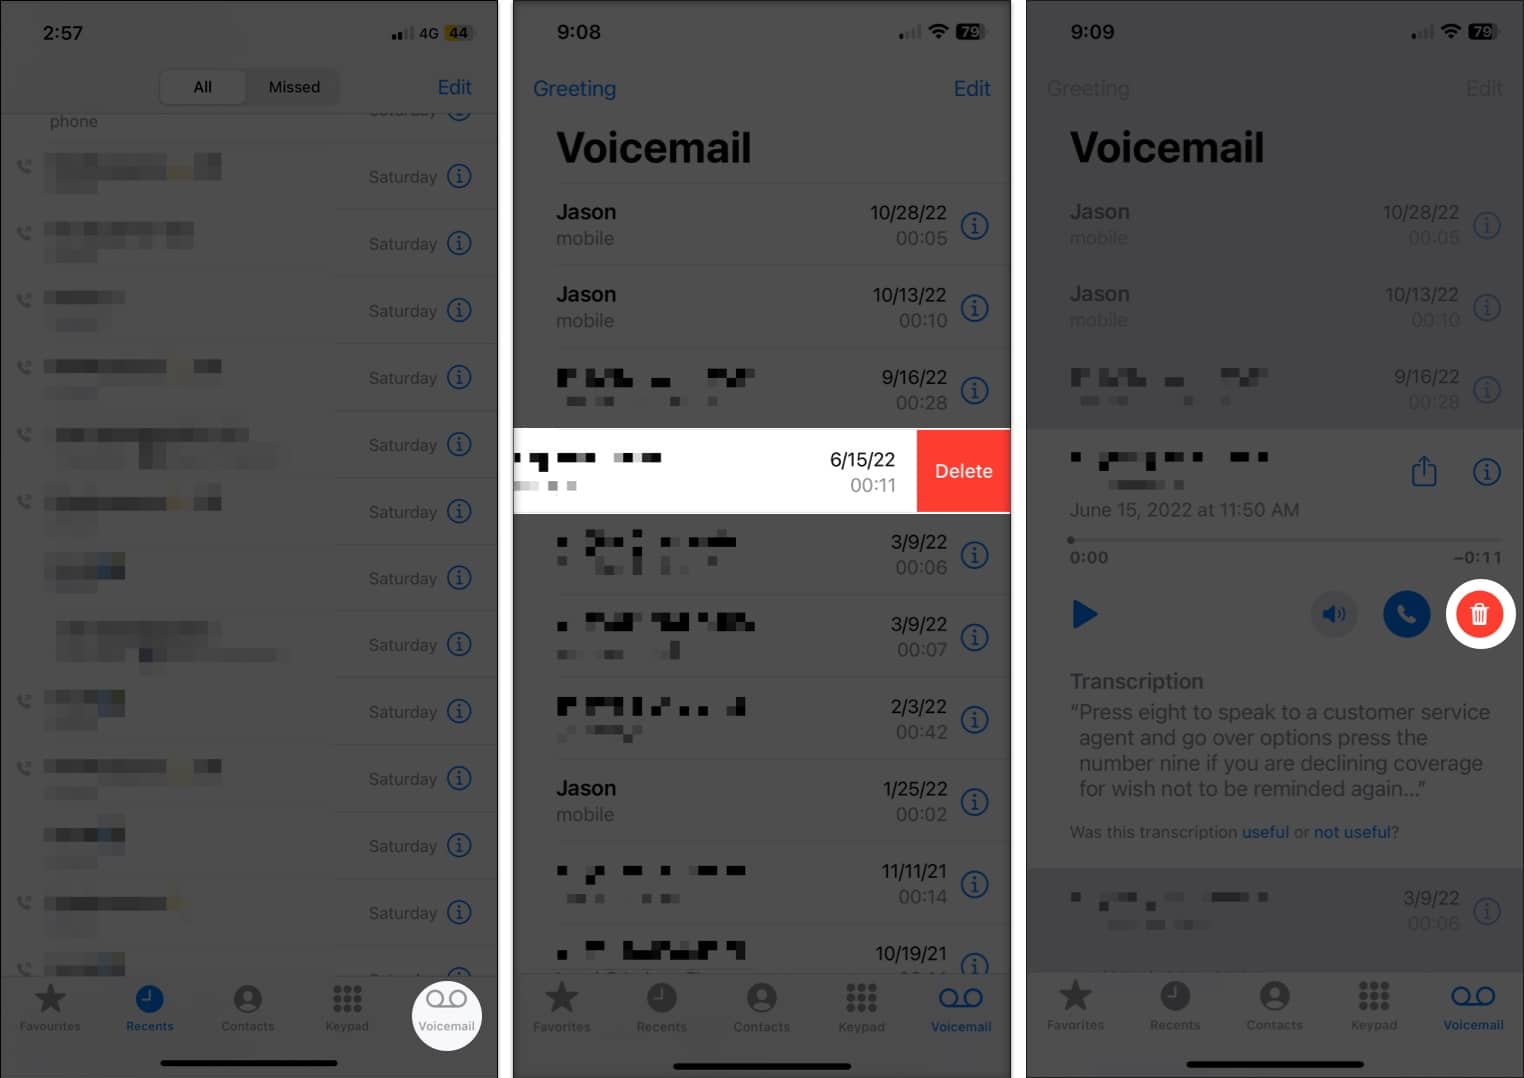 delete a voicemail on your iPhone